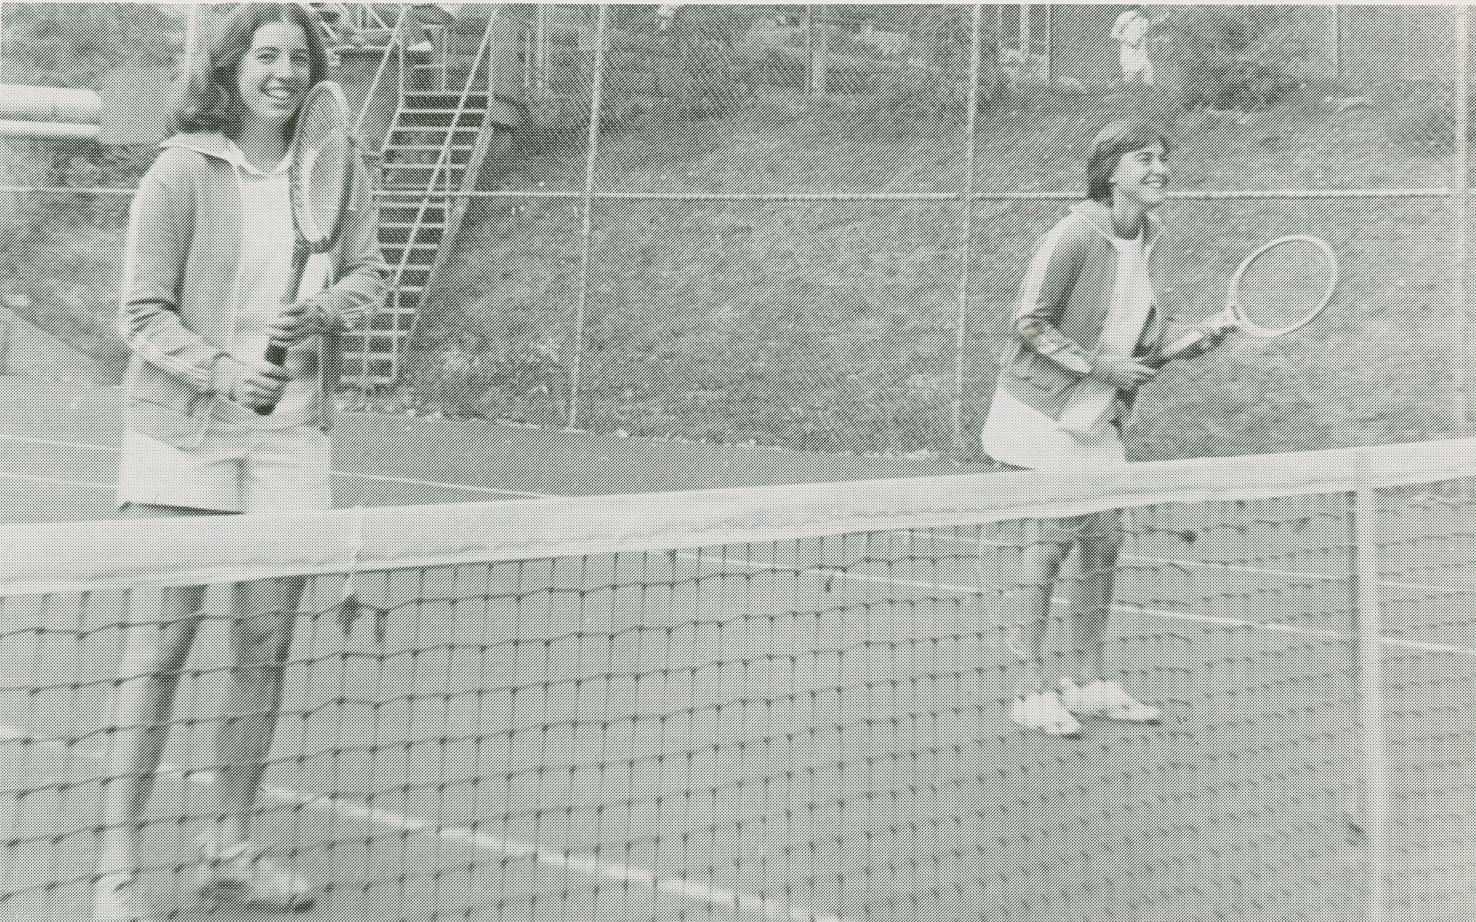 Two members of the women's tennis team stand on a tennis court behind a net